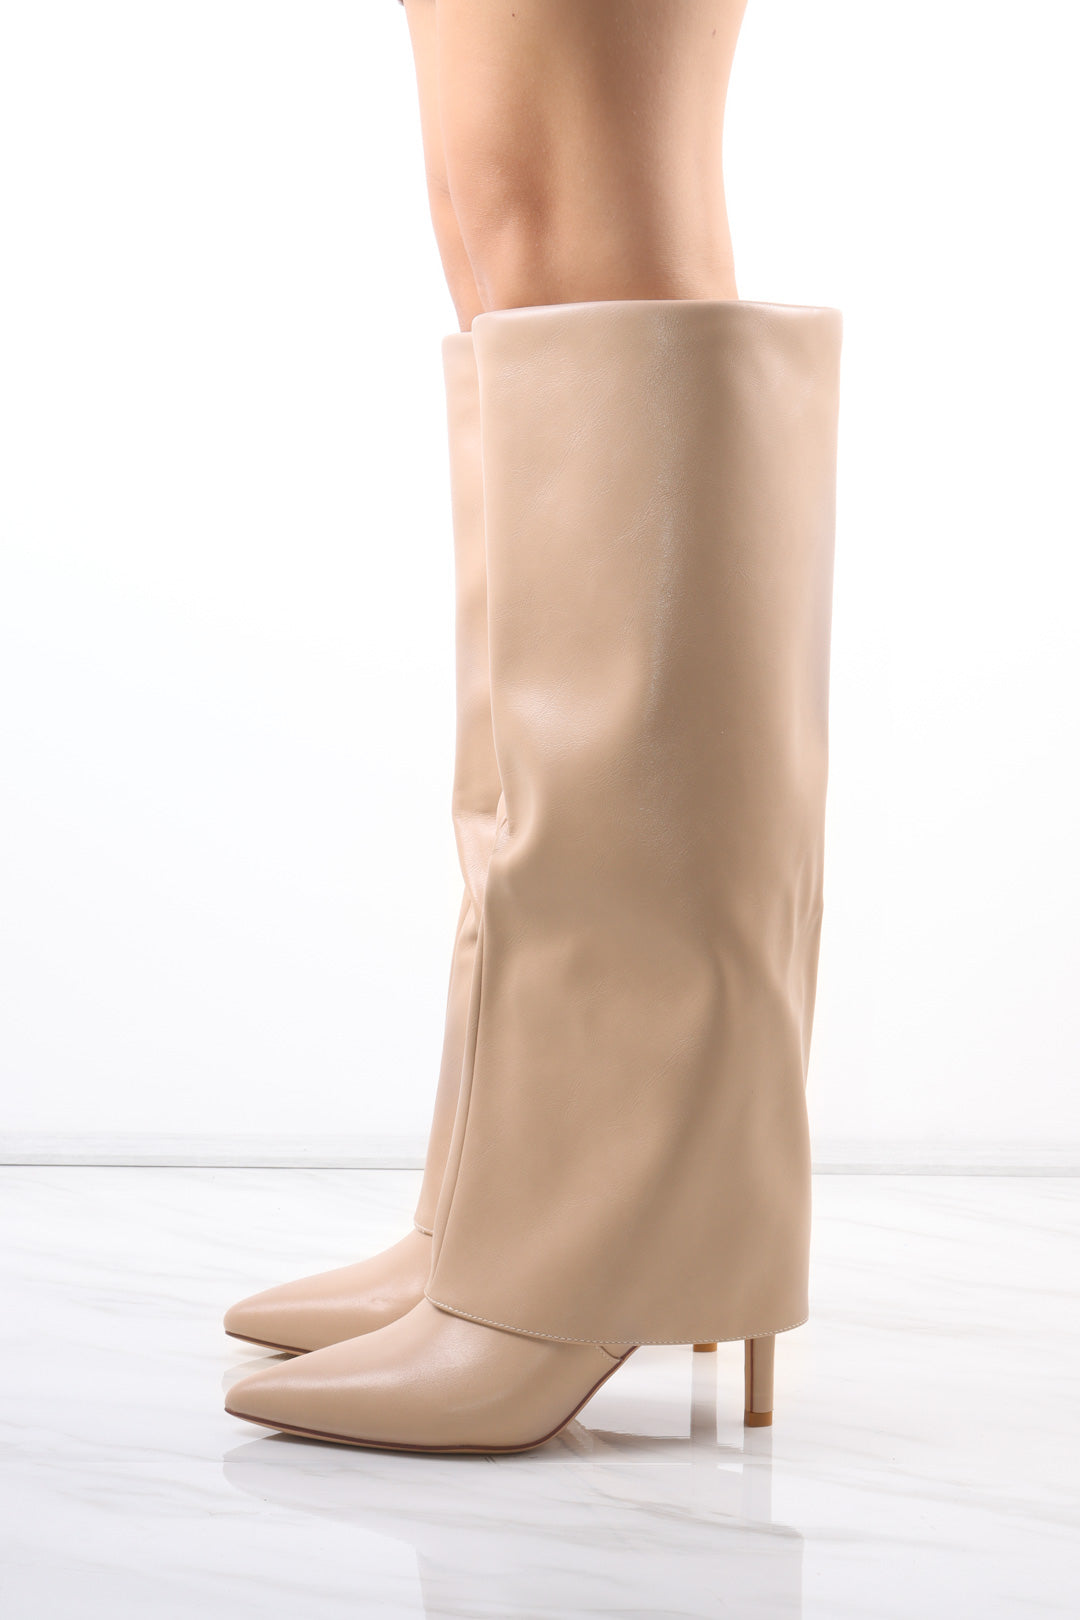 Load image into Gallery viewer, Beige Stiletto Leather Fold Over Shark Buckle Knee High Boot
